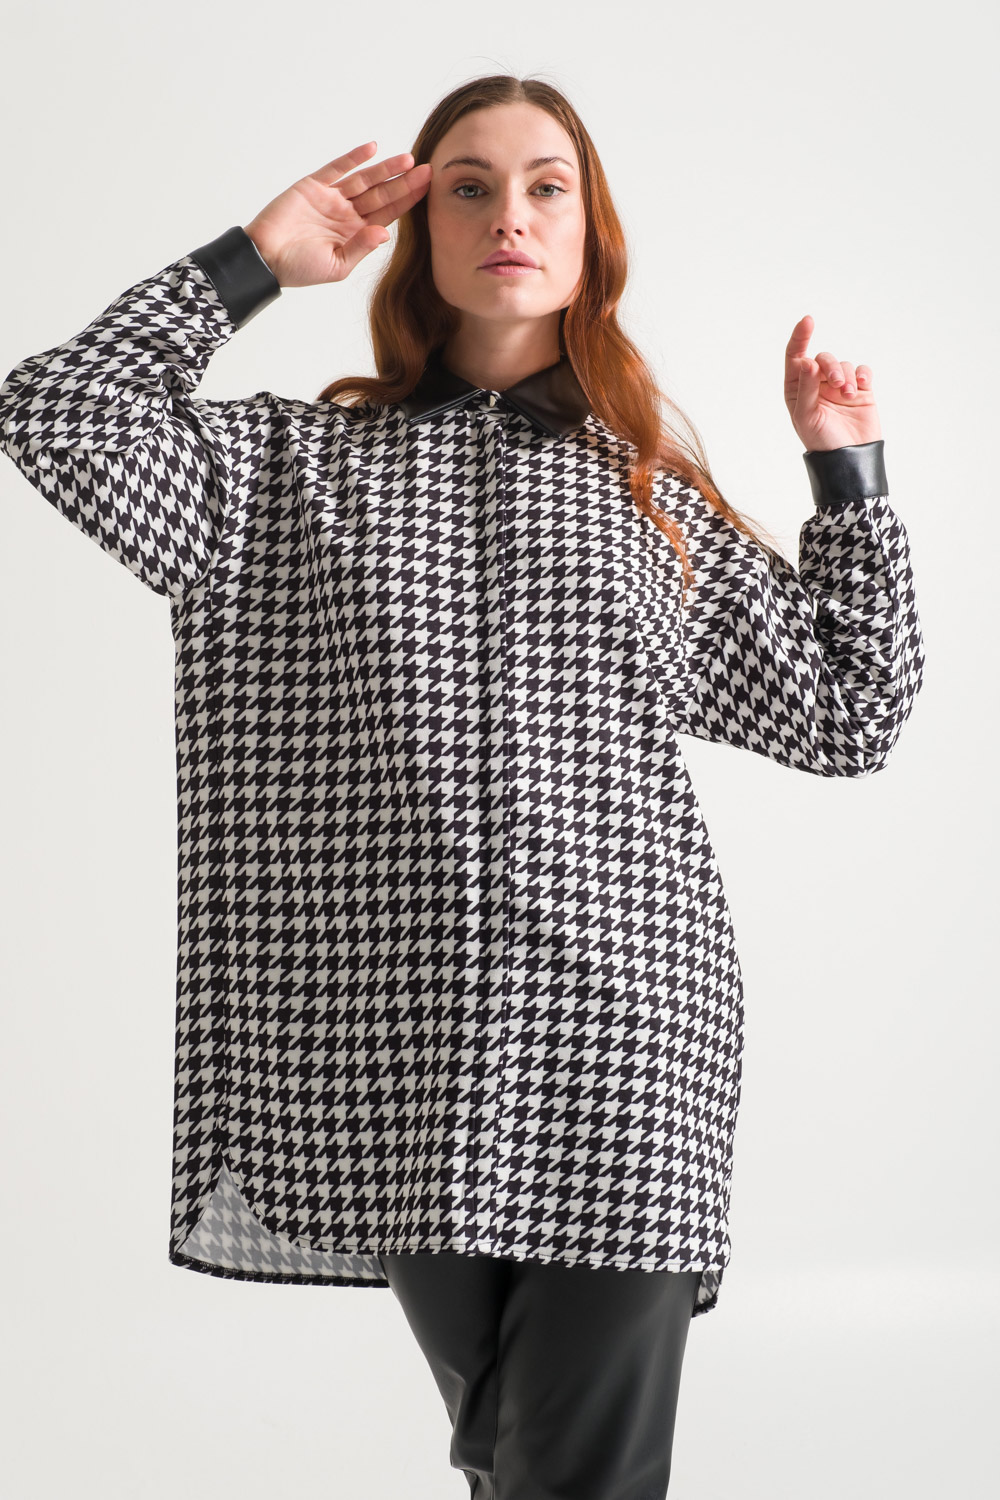 Goosefoot Patterned Black Tunic with Hidden Buttons